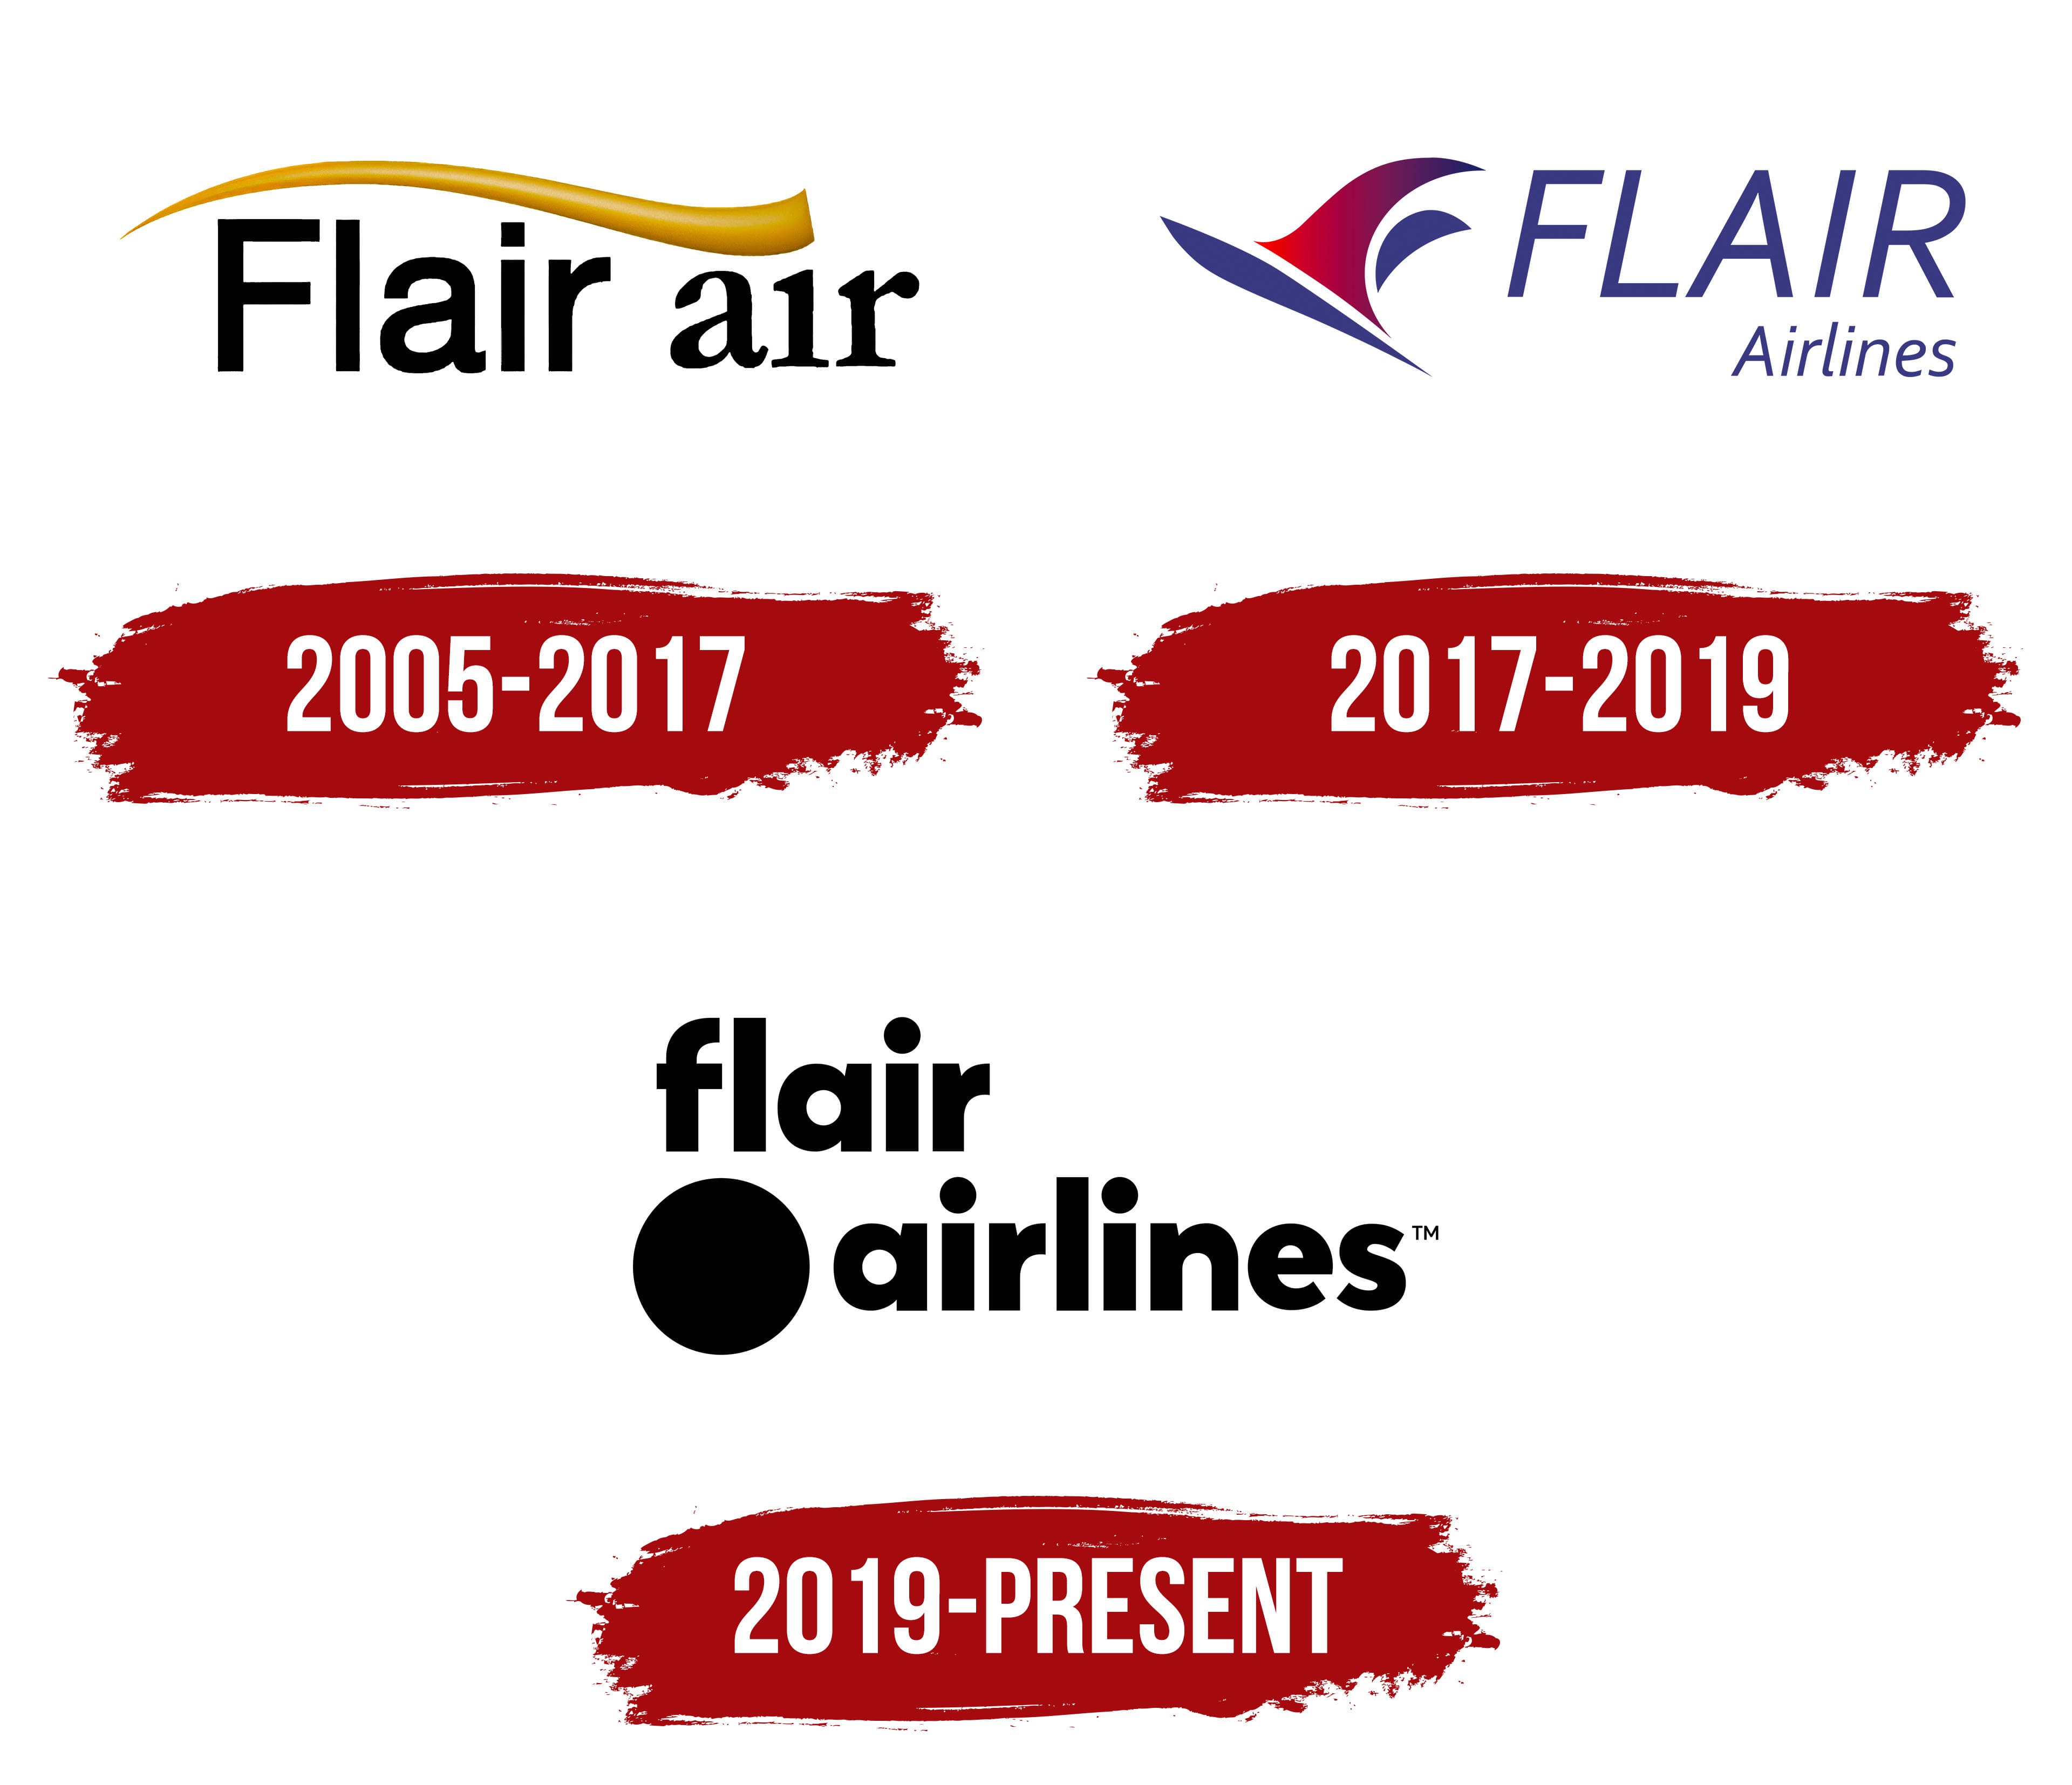 Flair Airlines Logo, symbol, meaning, history, PNG, brand